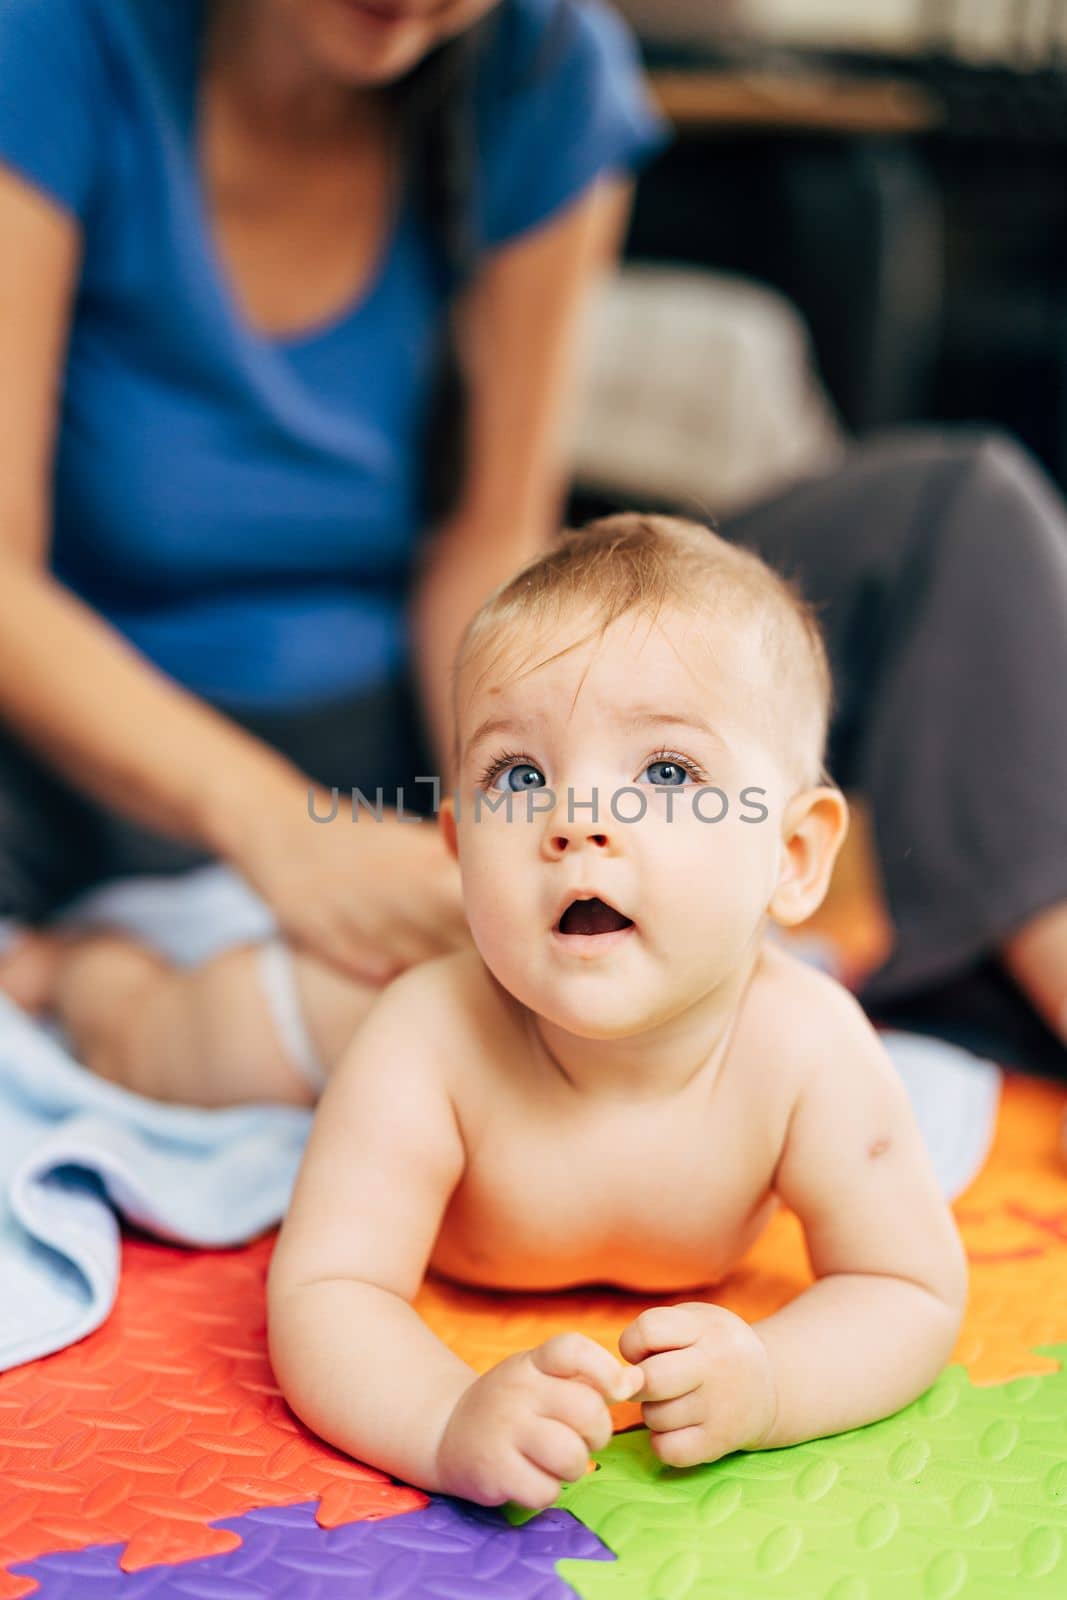 Mom changes diapers to a baby lying on his tummy on a colored rug and pensively looking into the distance. High quality photo